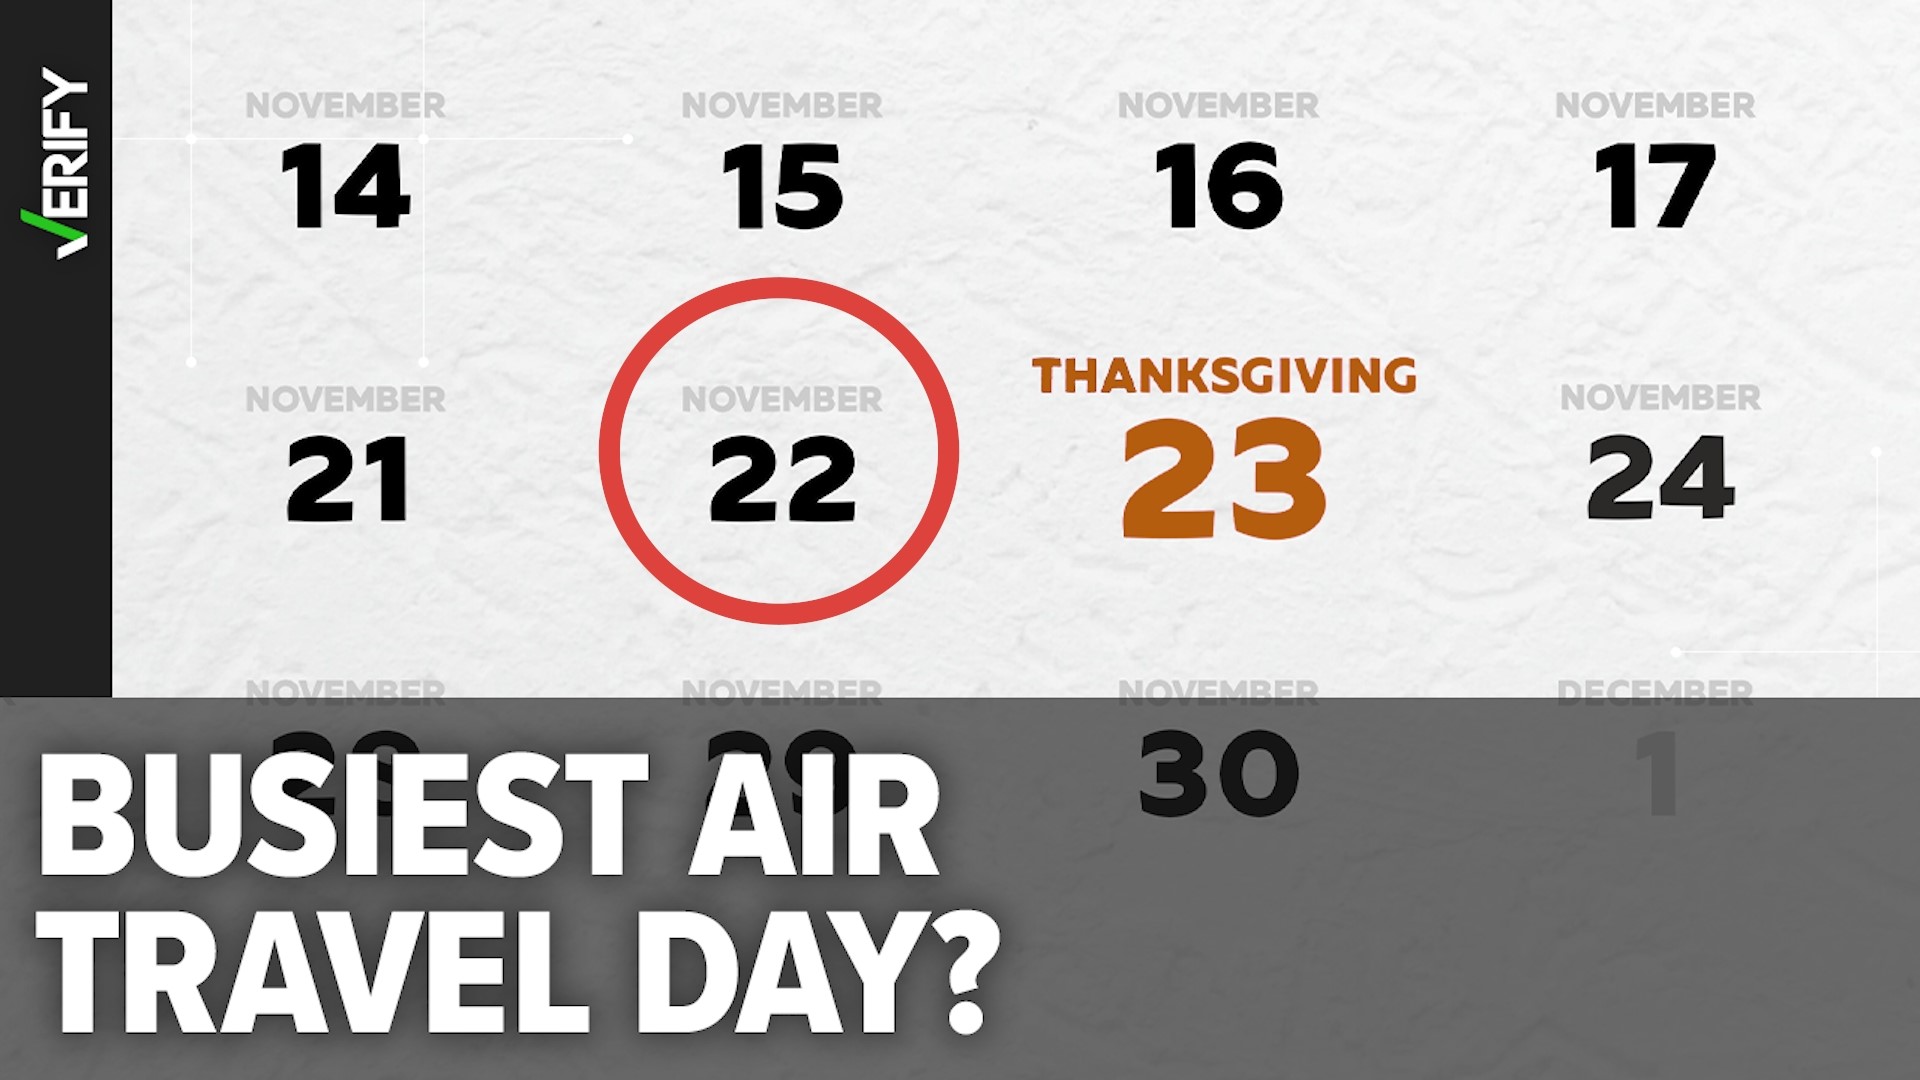 No, the Wednesday before Thanksgiving is not the busiest air travel day